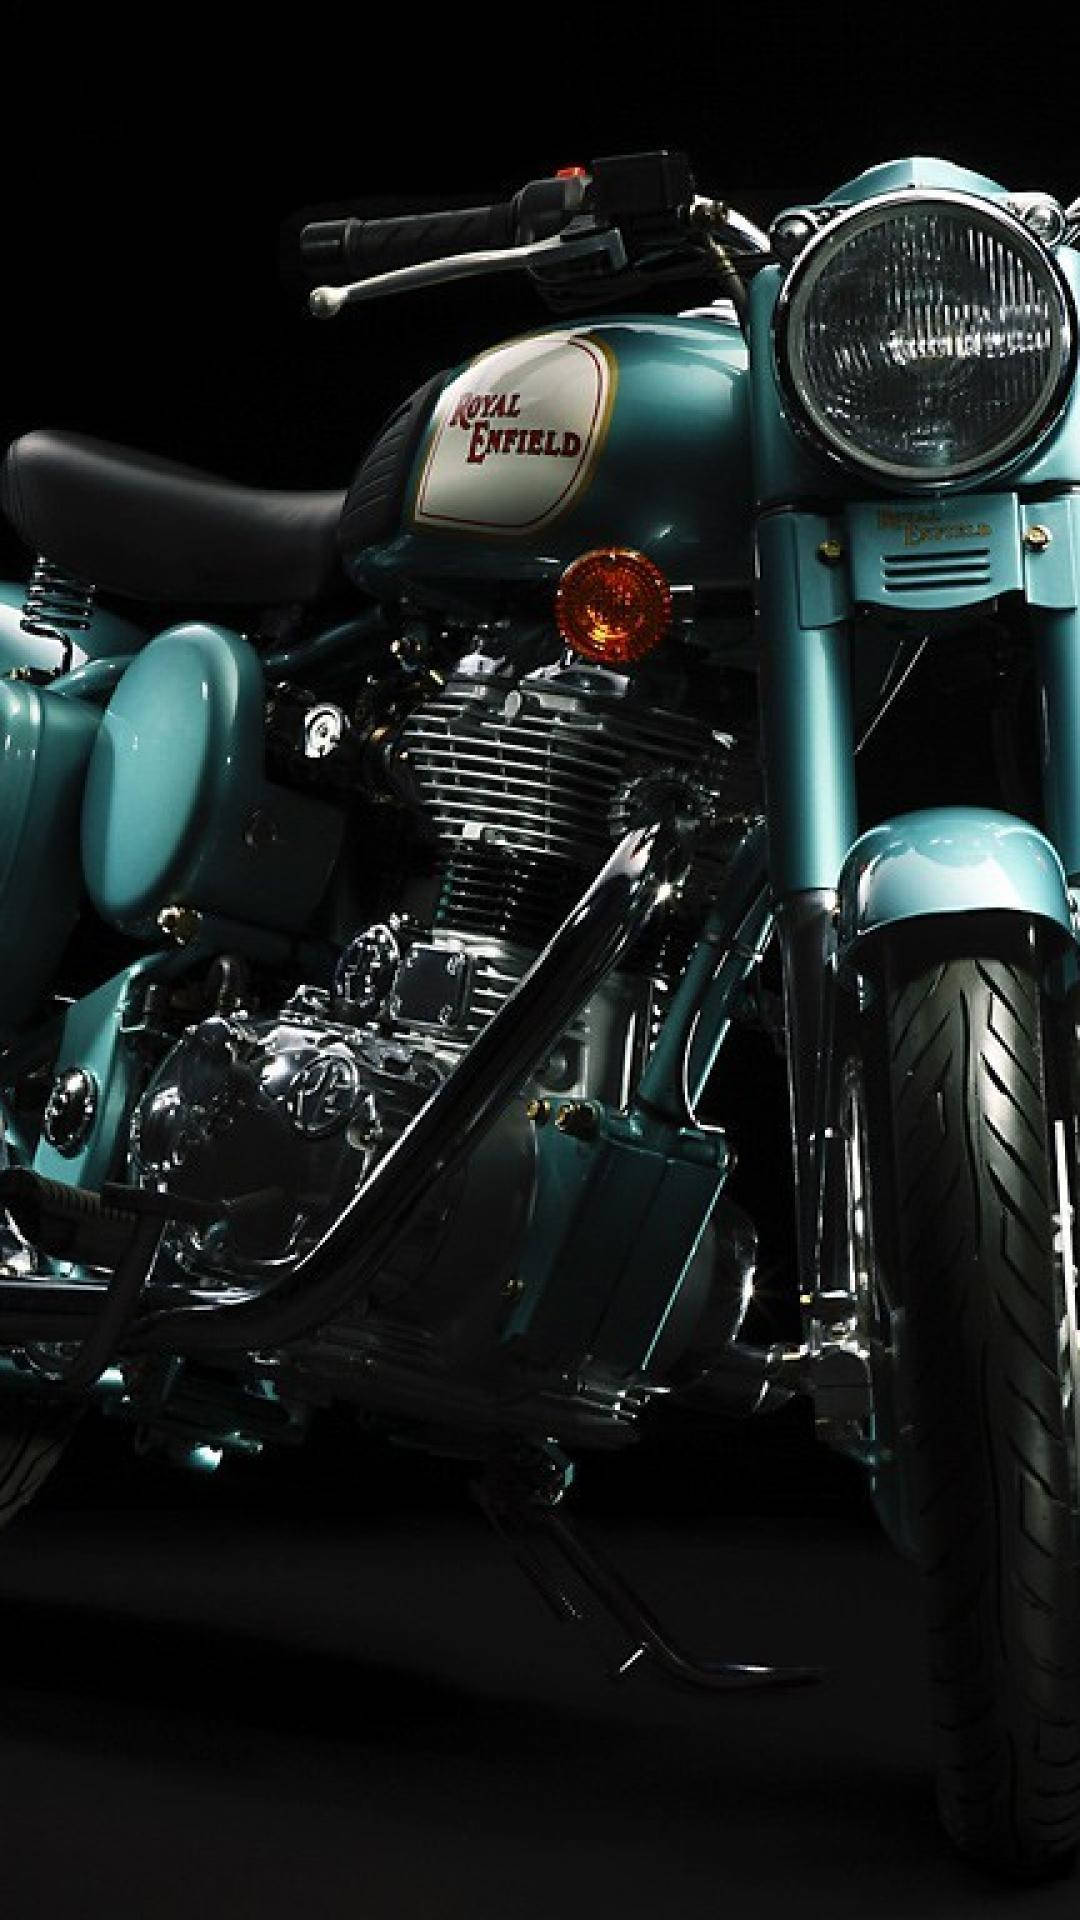 Royal Enfield wallpaper by RS2732  Download on ZEDGE  303a